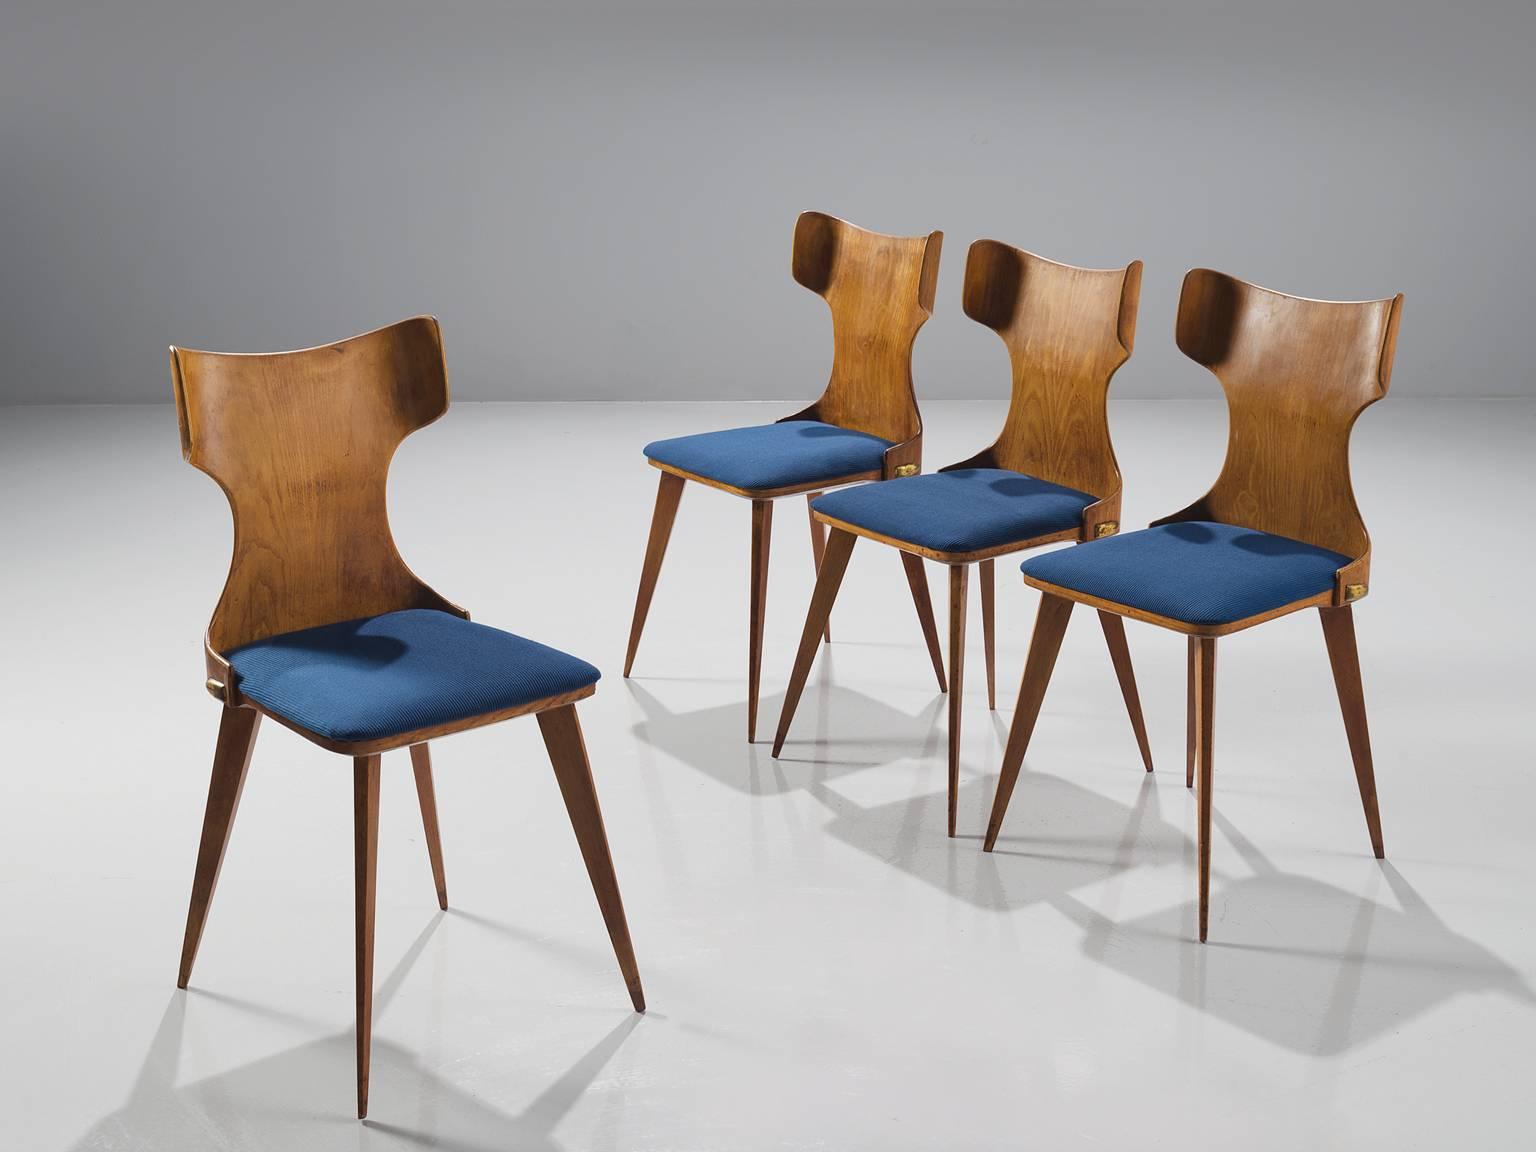 Carlo Ratti, four dining chairs in bent wood and blue fabric, Italy, 1950s.

This Italian set of dining chairs is executed in bent wood and have a blue upholstered seat. The legs are tapered and make these chairs very frivolous and playful. Typical